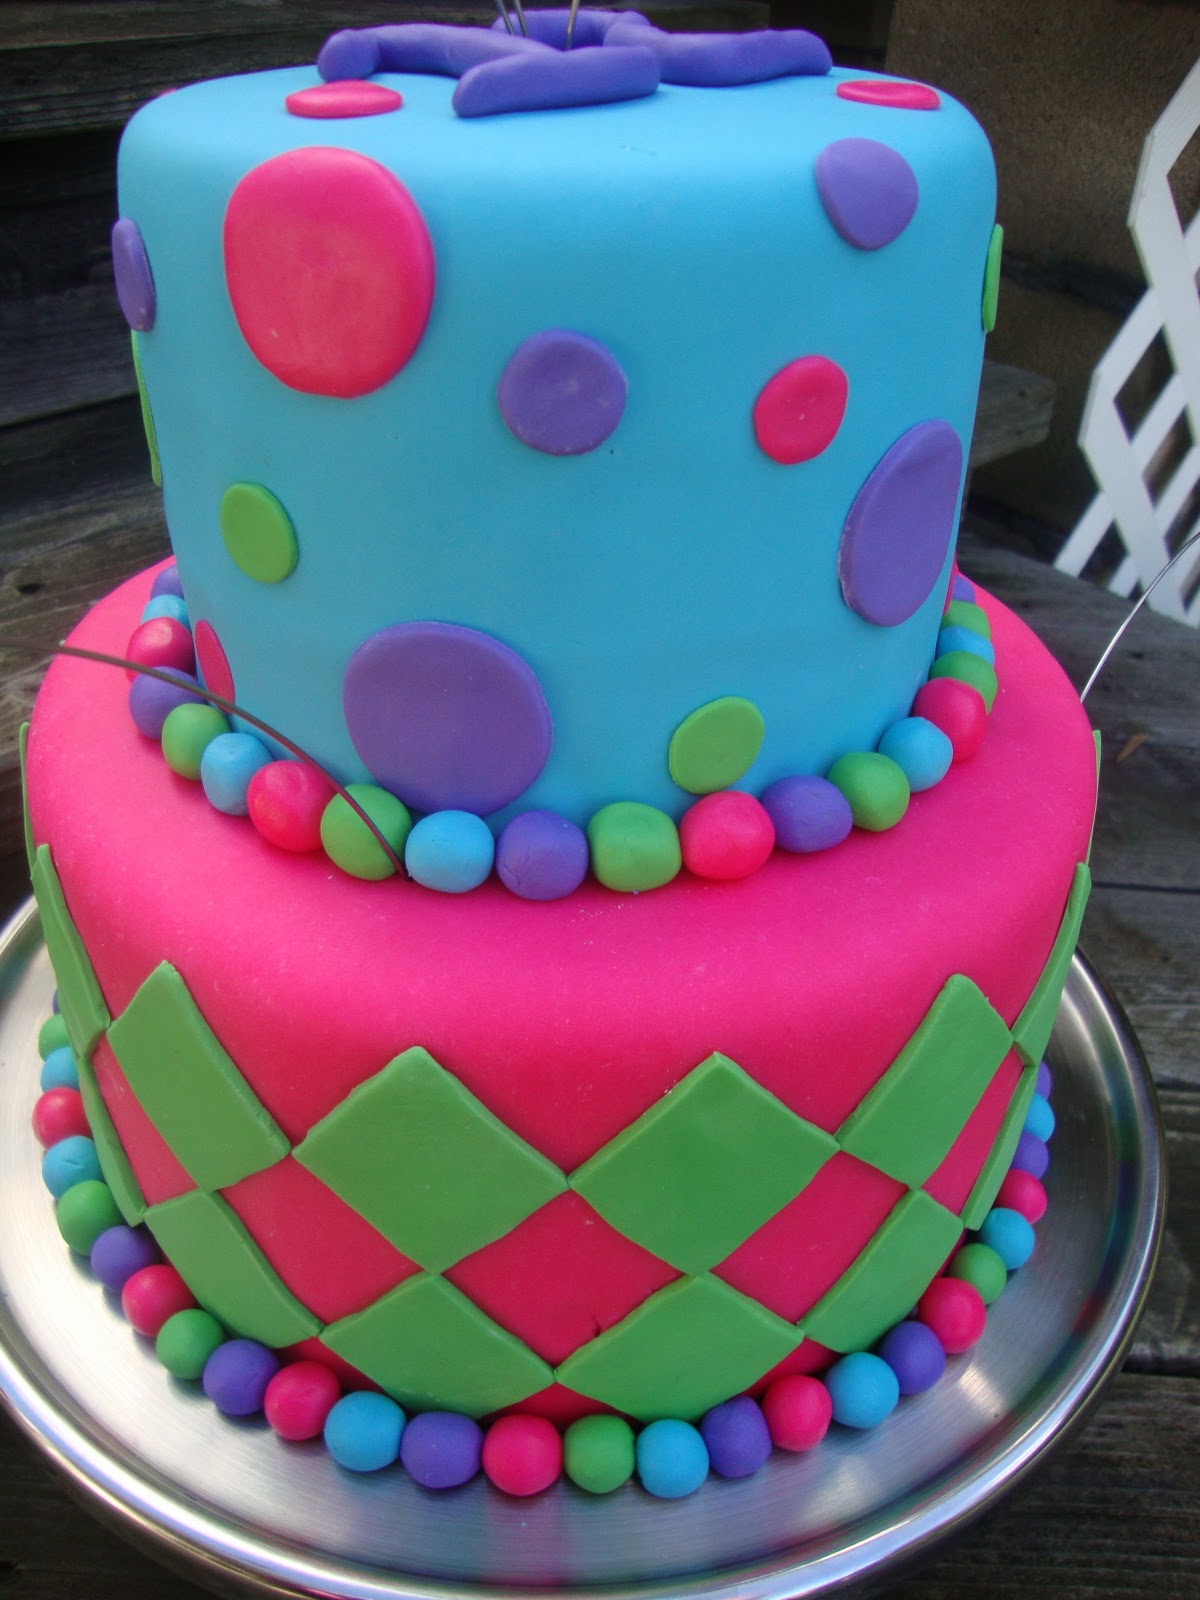 cool cakes made this cake for a 12 year old girls birthday party the top cake 